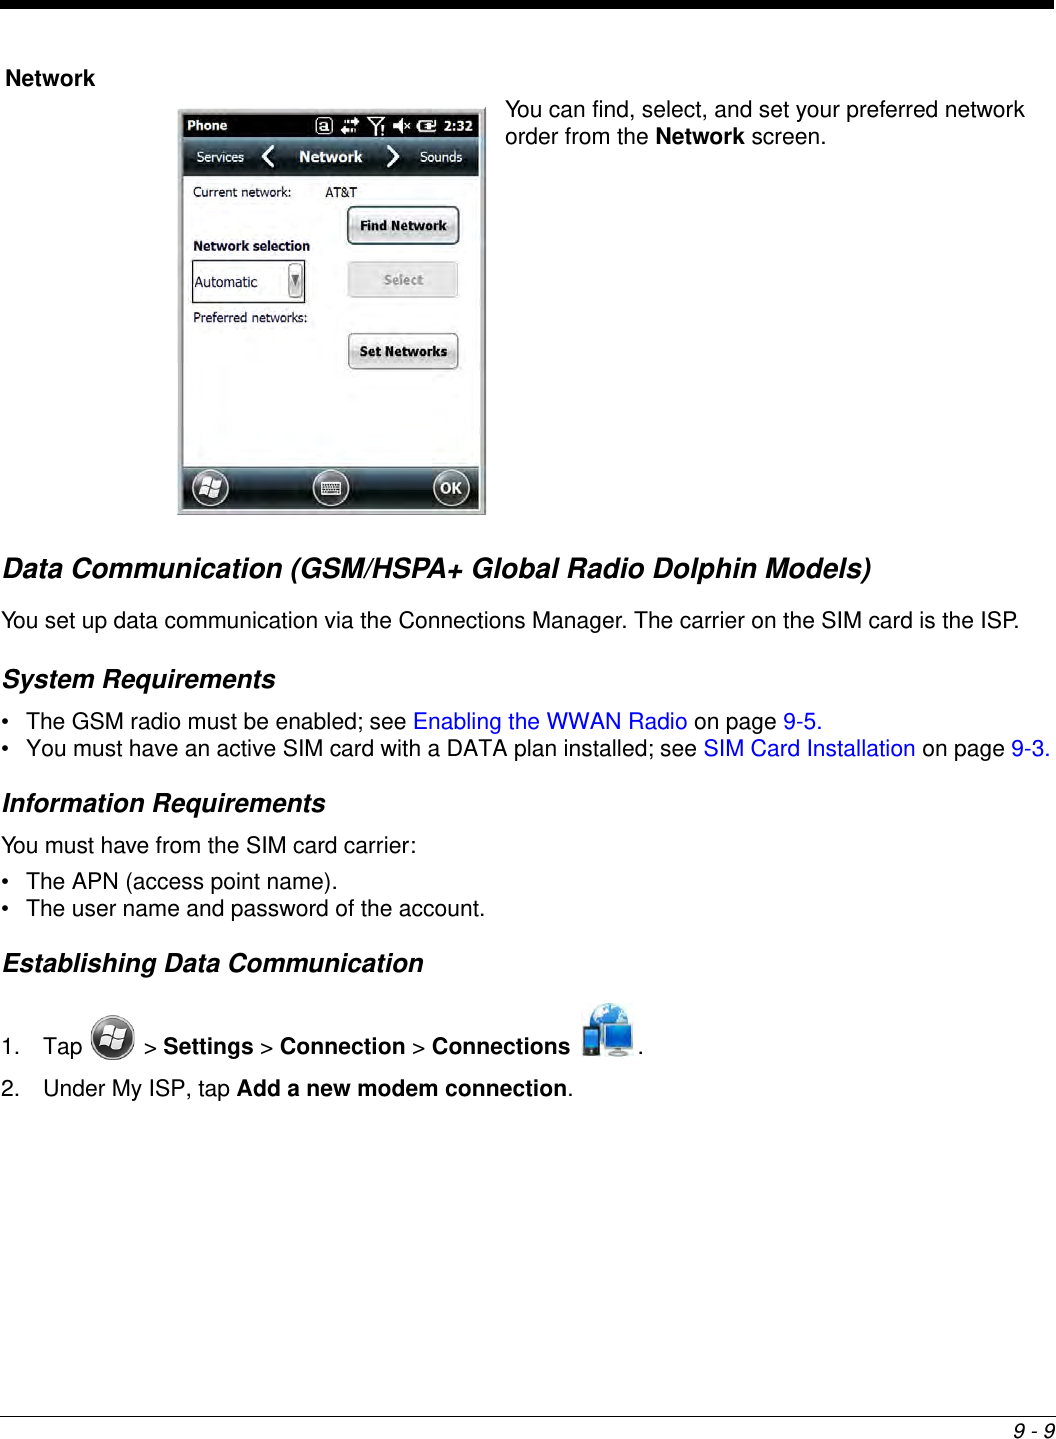 9 - 9Data Communication (GSM/HSPA+ Global Radio Dolphin Models)You set up data communication via the Connections Manager. The carrier on the SIM card is the ISP.System Requirements• The GSM radio must be enabled; see Enabling the WWAN Radio on page 9-5.• You must have an active SIM card with a DATA plan installed; see SIM Card Installation on page 9-3.Information RequirementsYou must have from the SIM card carrier:• The APN (access point name).• The user name and password of the account.Establishing Data Communication1. Tap  &gt; Settings &gt; Connection &gt; Connections .2. Under My ISP, tap Add a new modem connection.NetworkYou can find, select, and set your preferred network order from the Network screen.